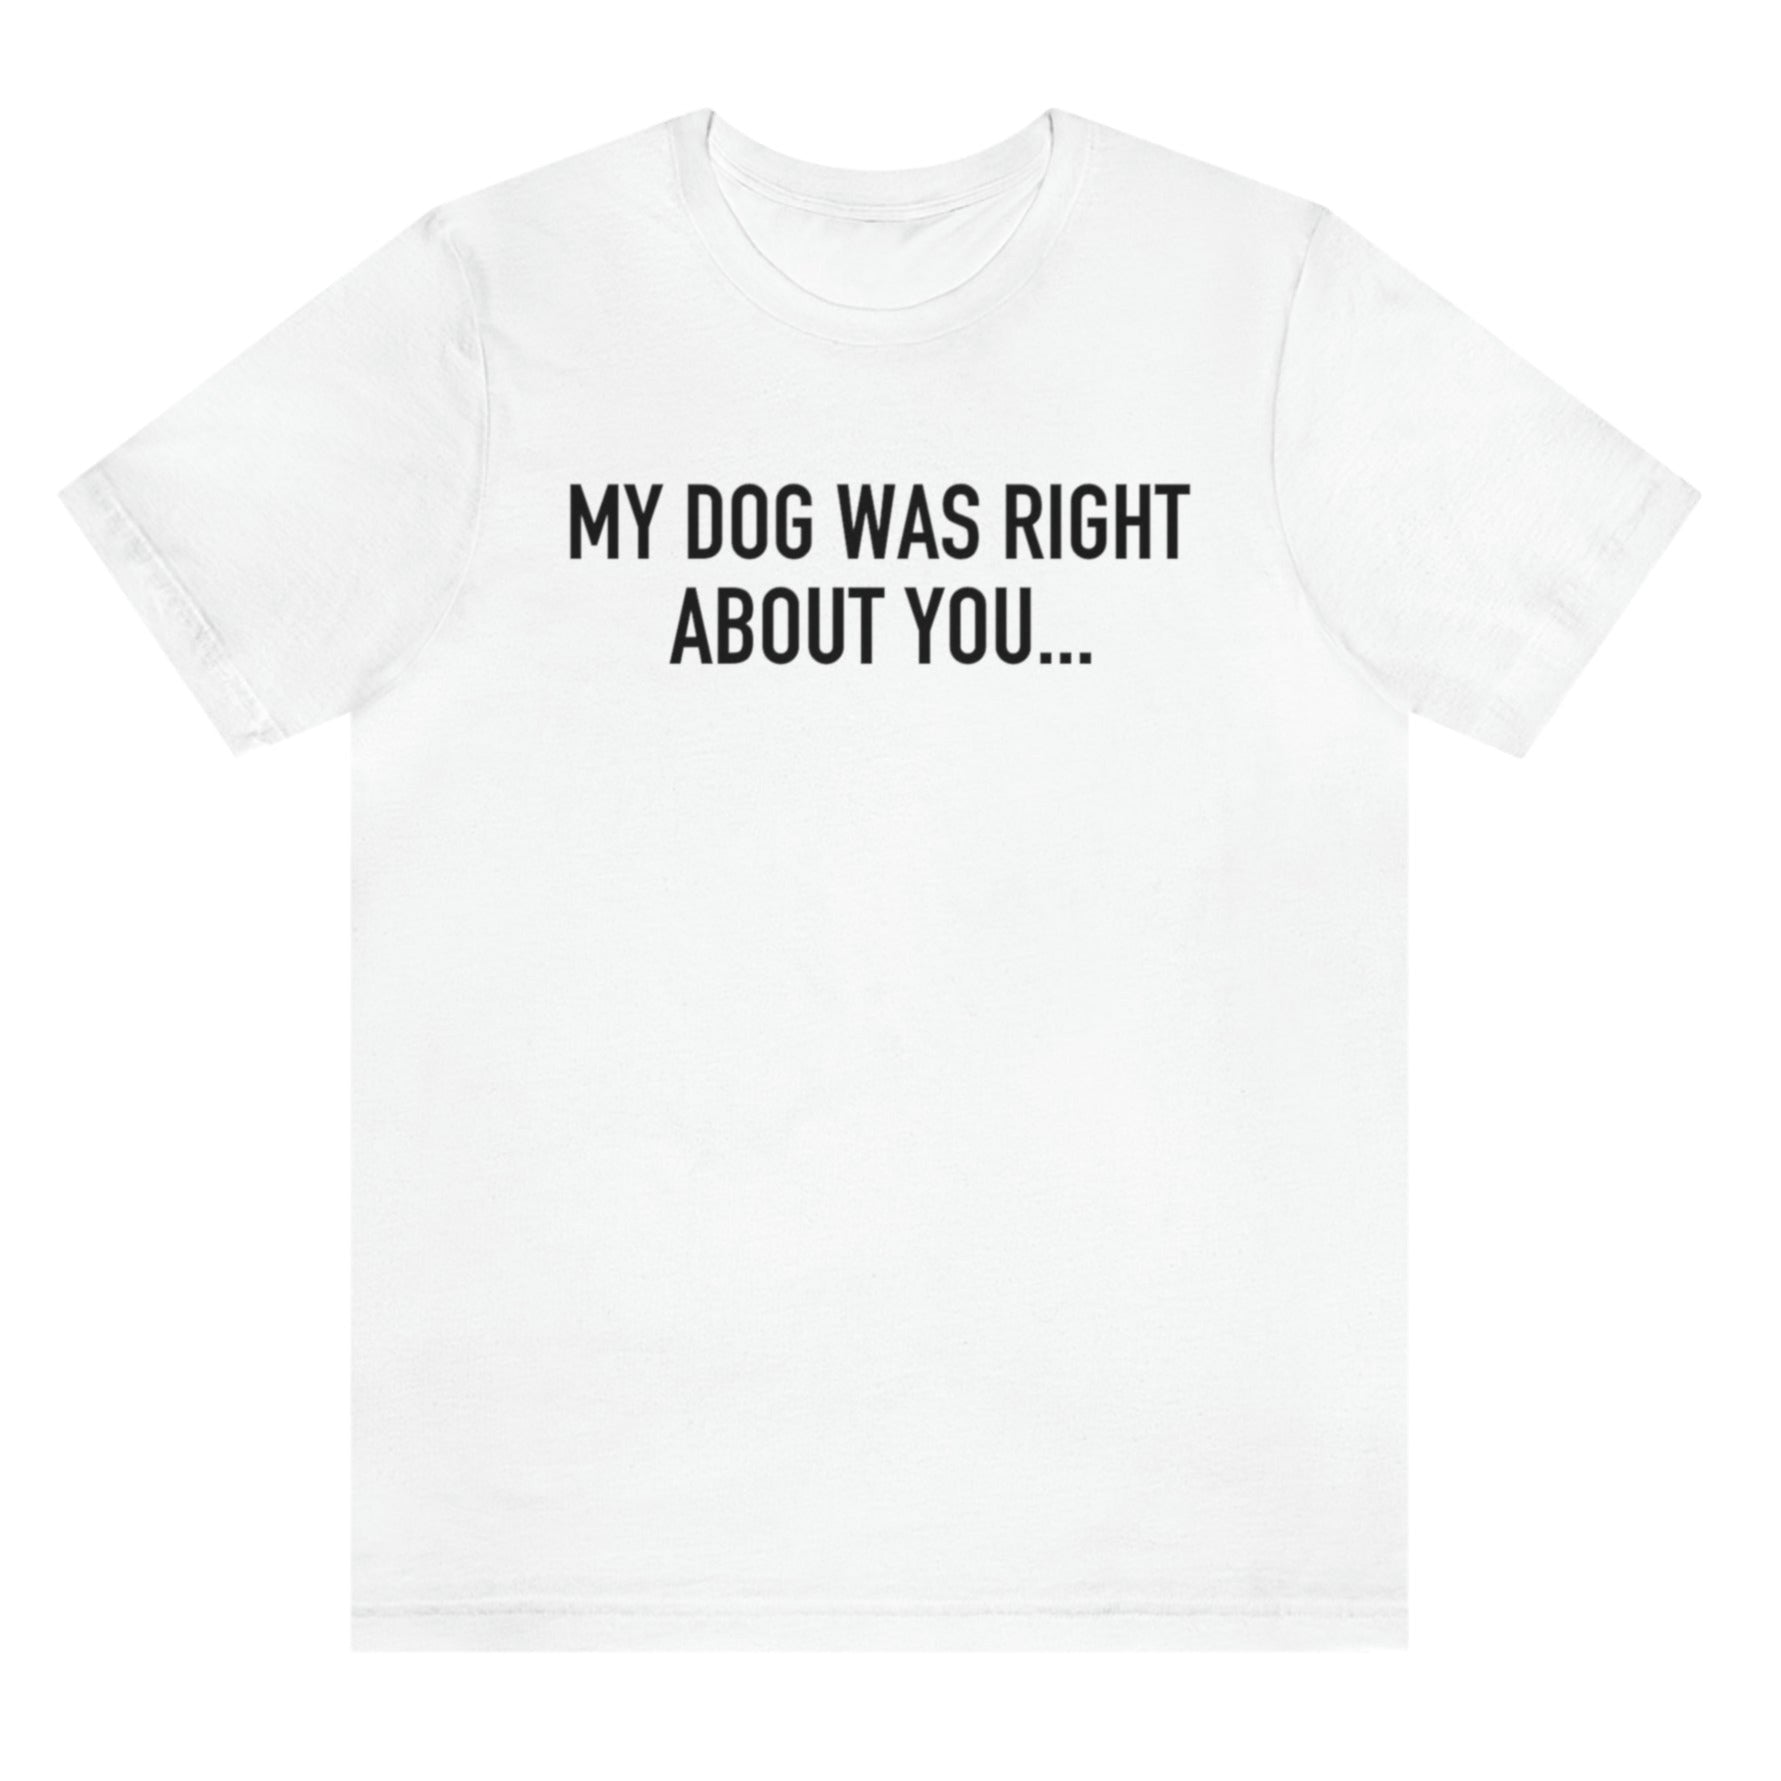 my-dog-was-right-about-you-white-t-shirt